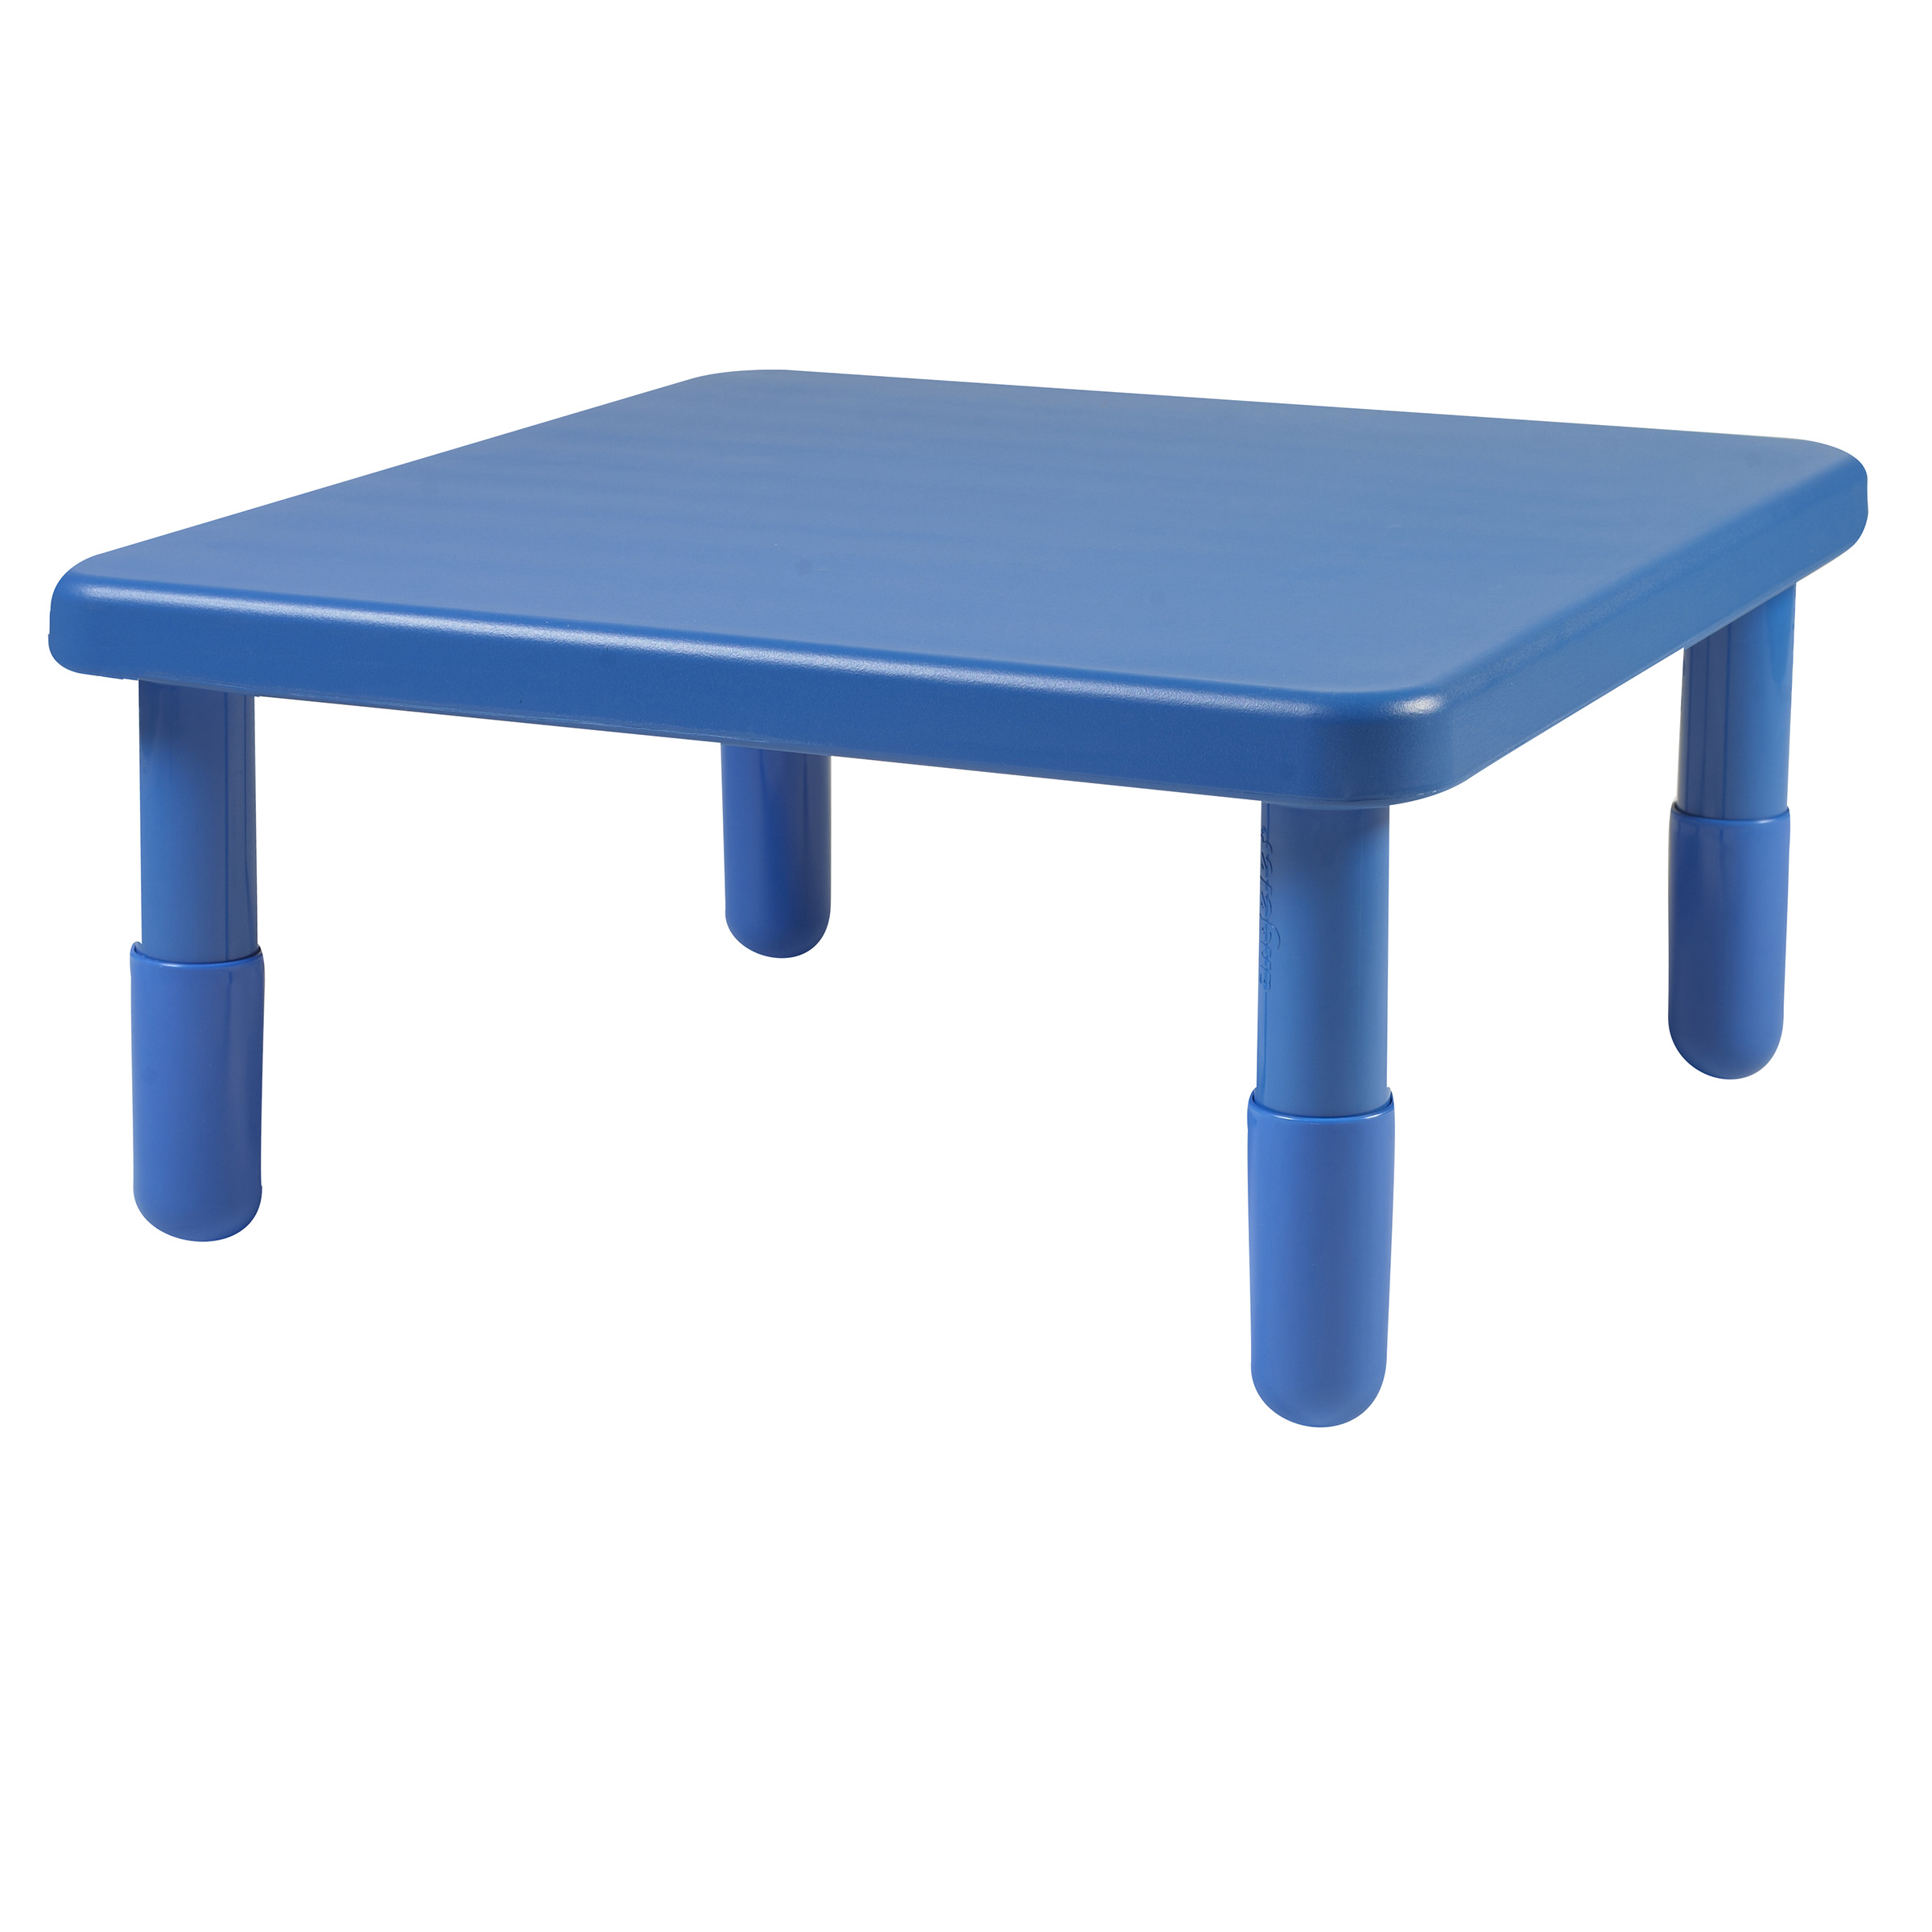 Value 71 cm  Square Table - Royal Blue with 35,5 cm  Legs